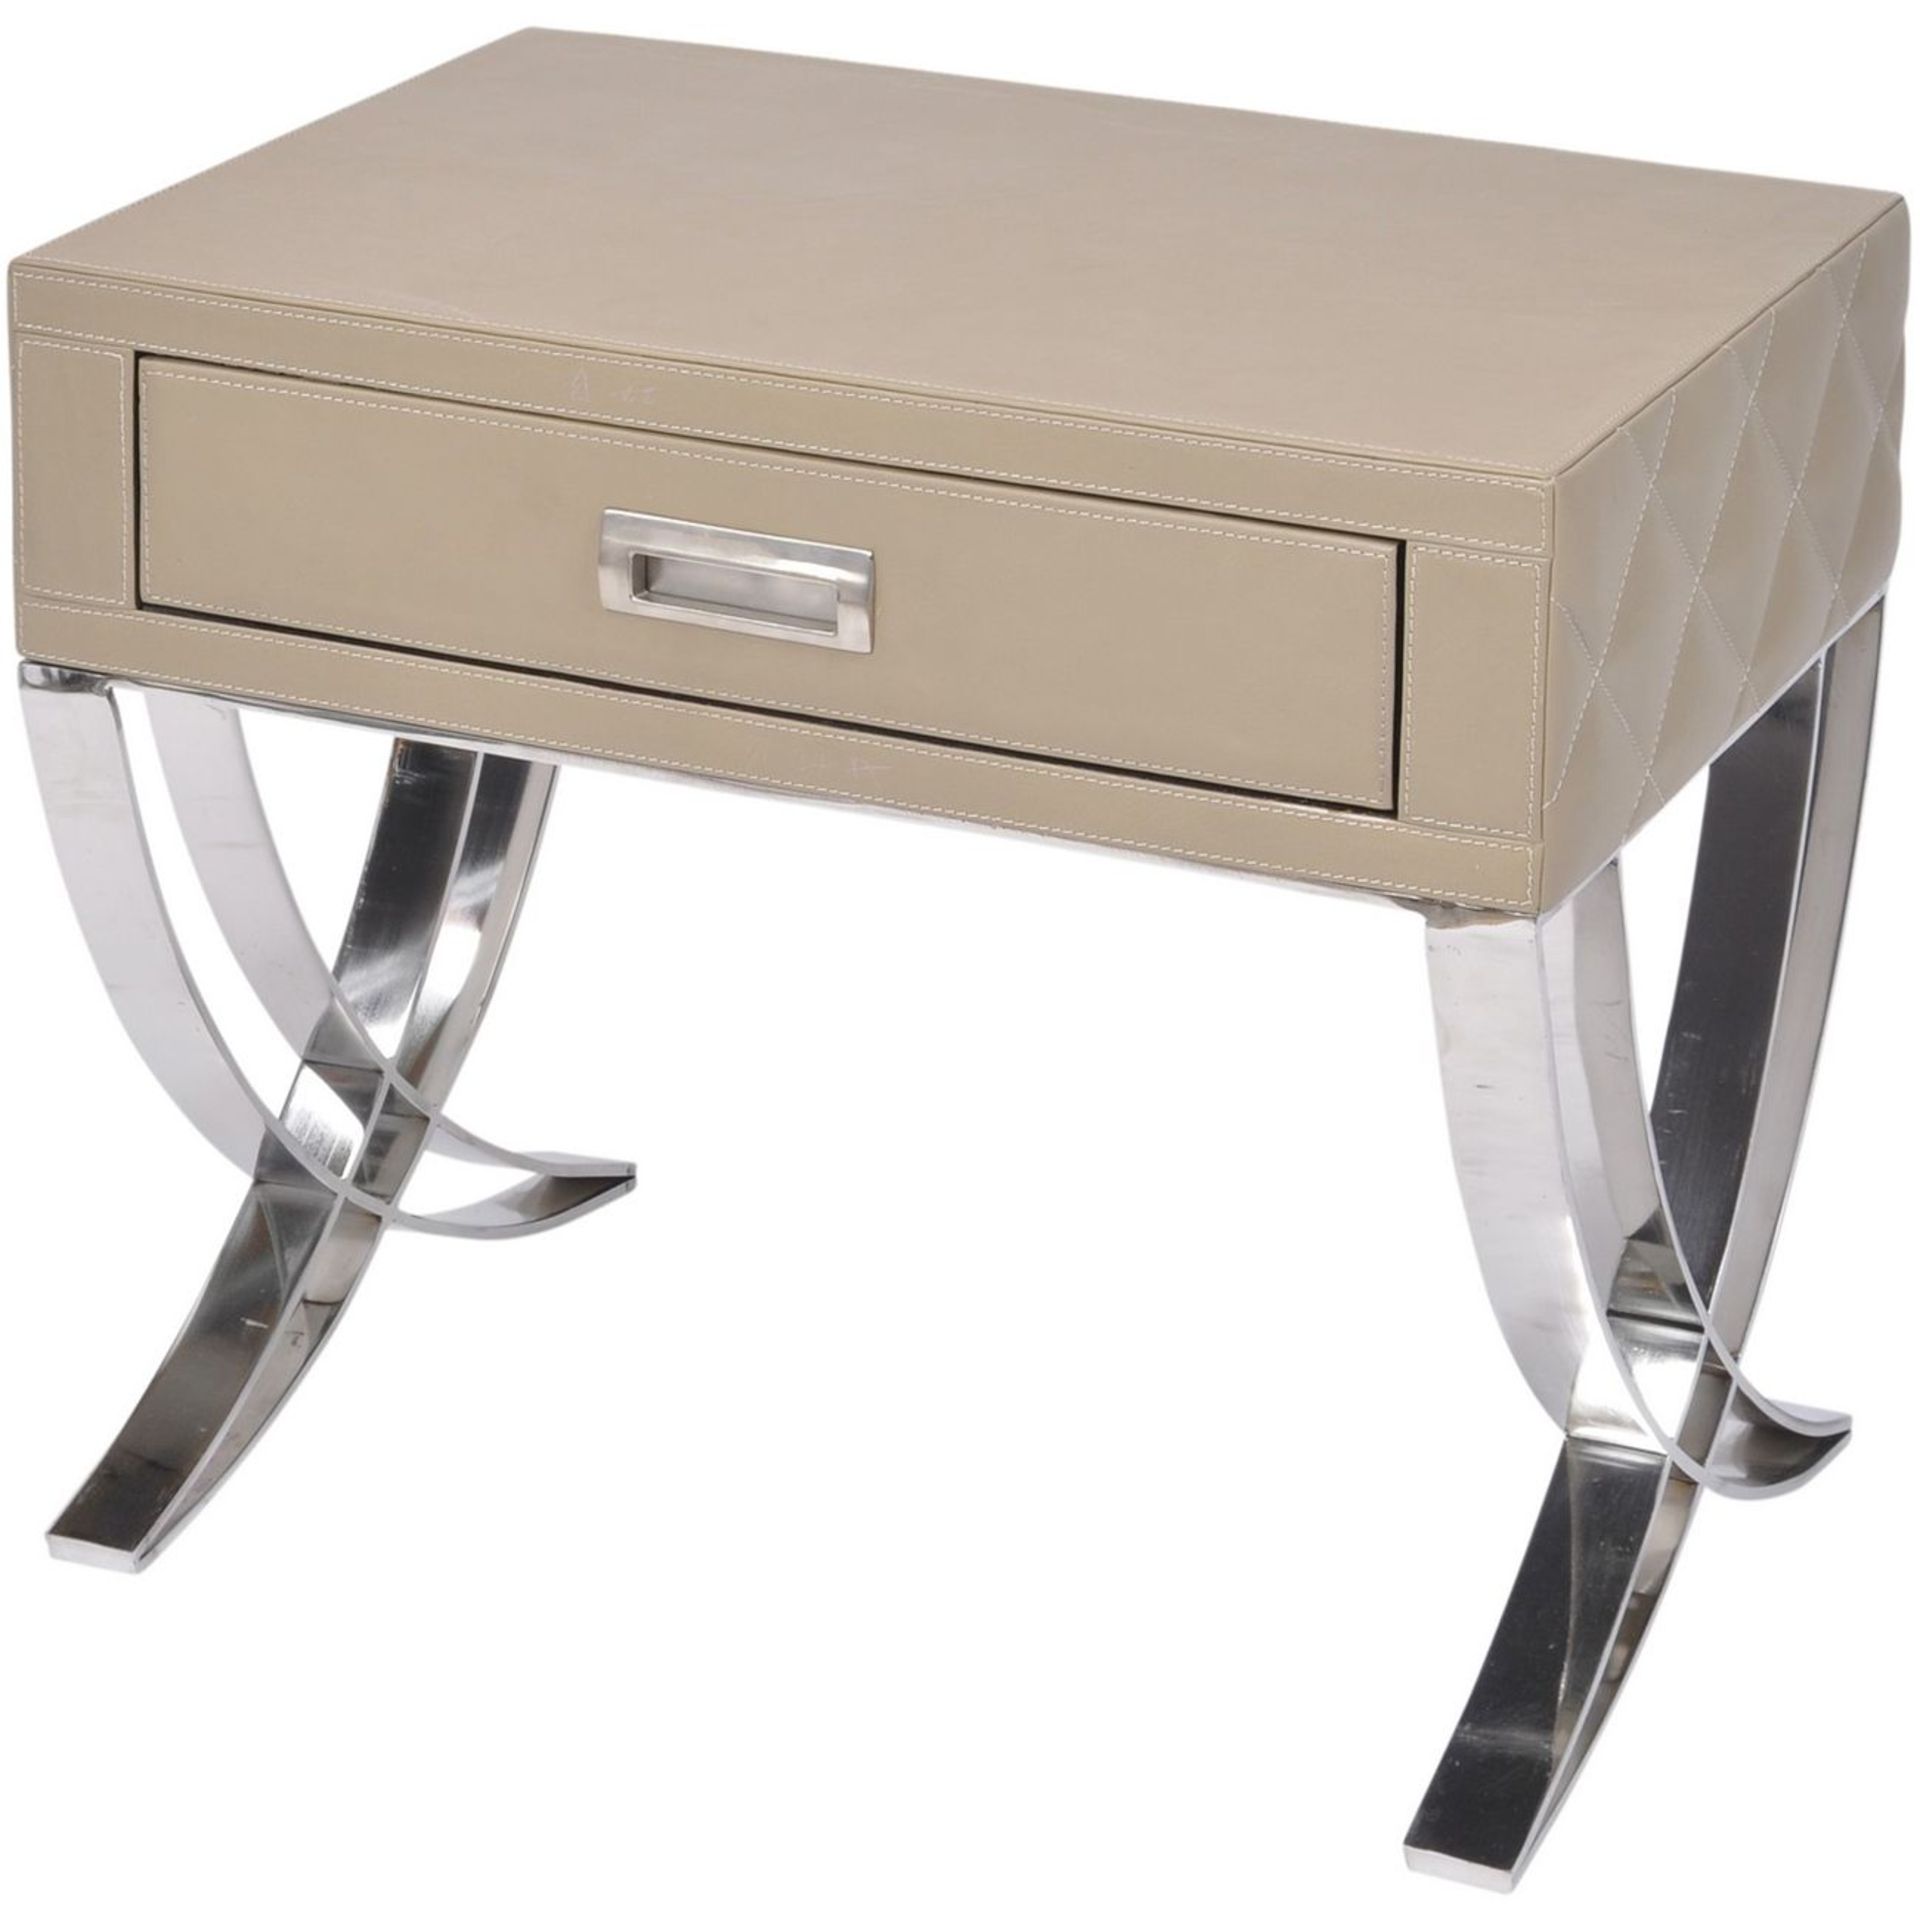 Ecclestone Leather One Drawer Side Table